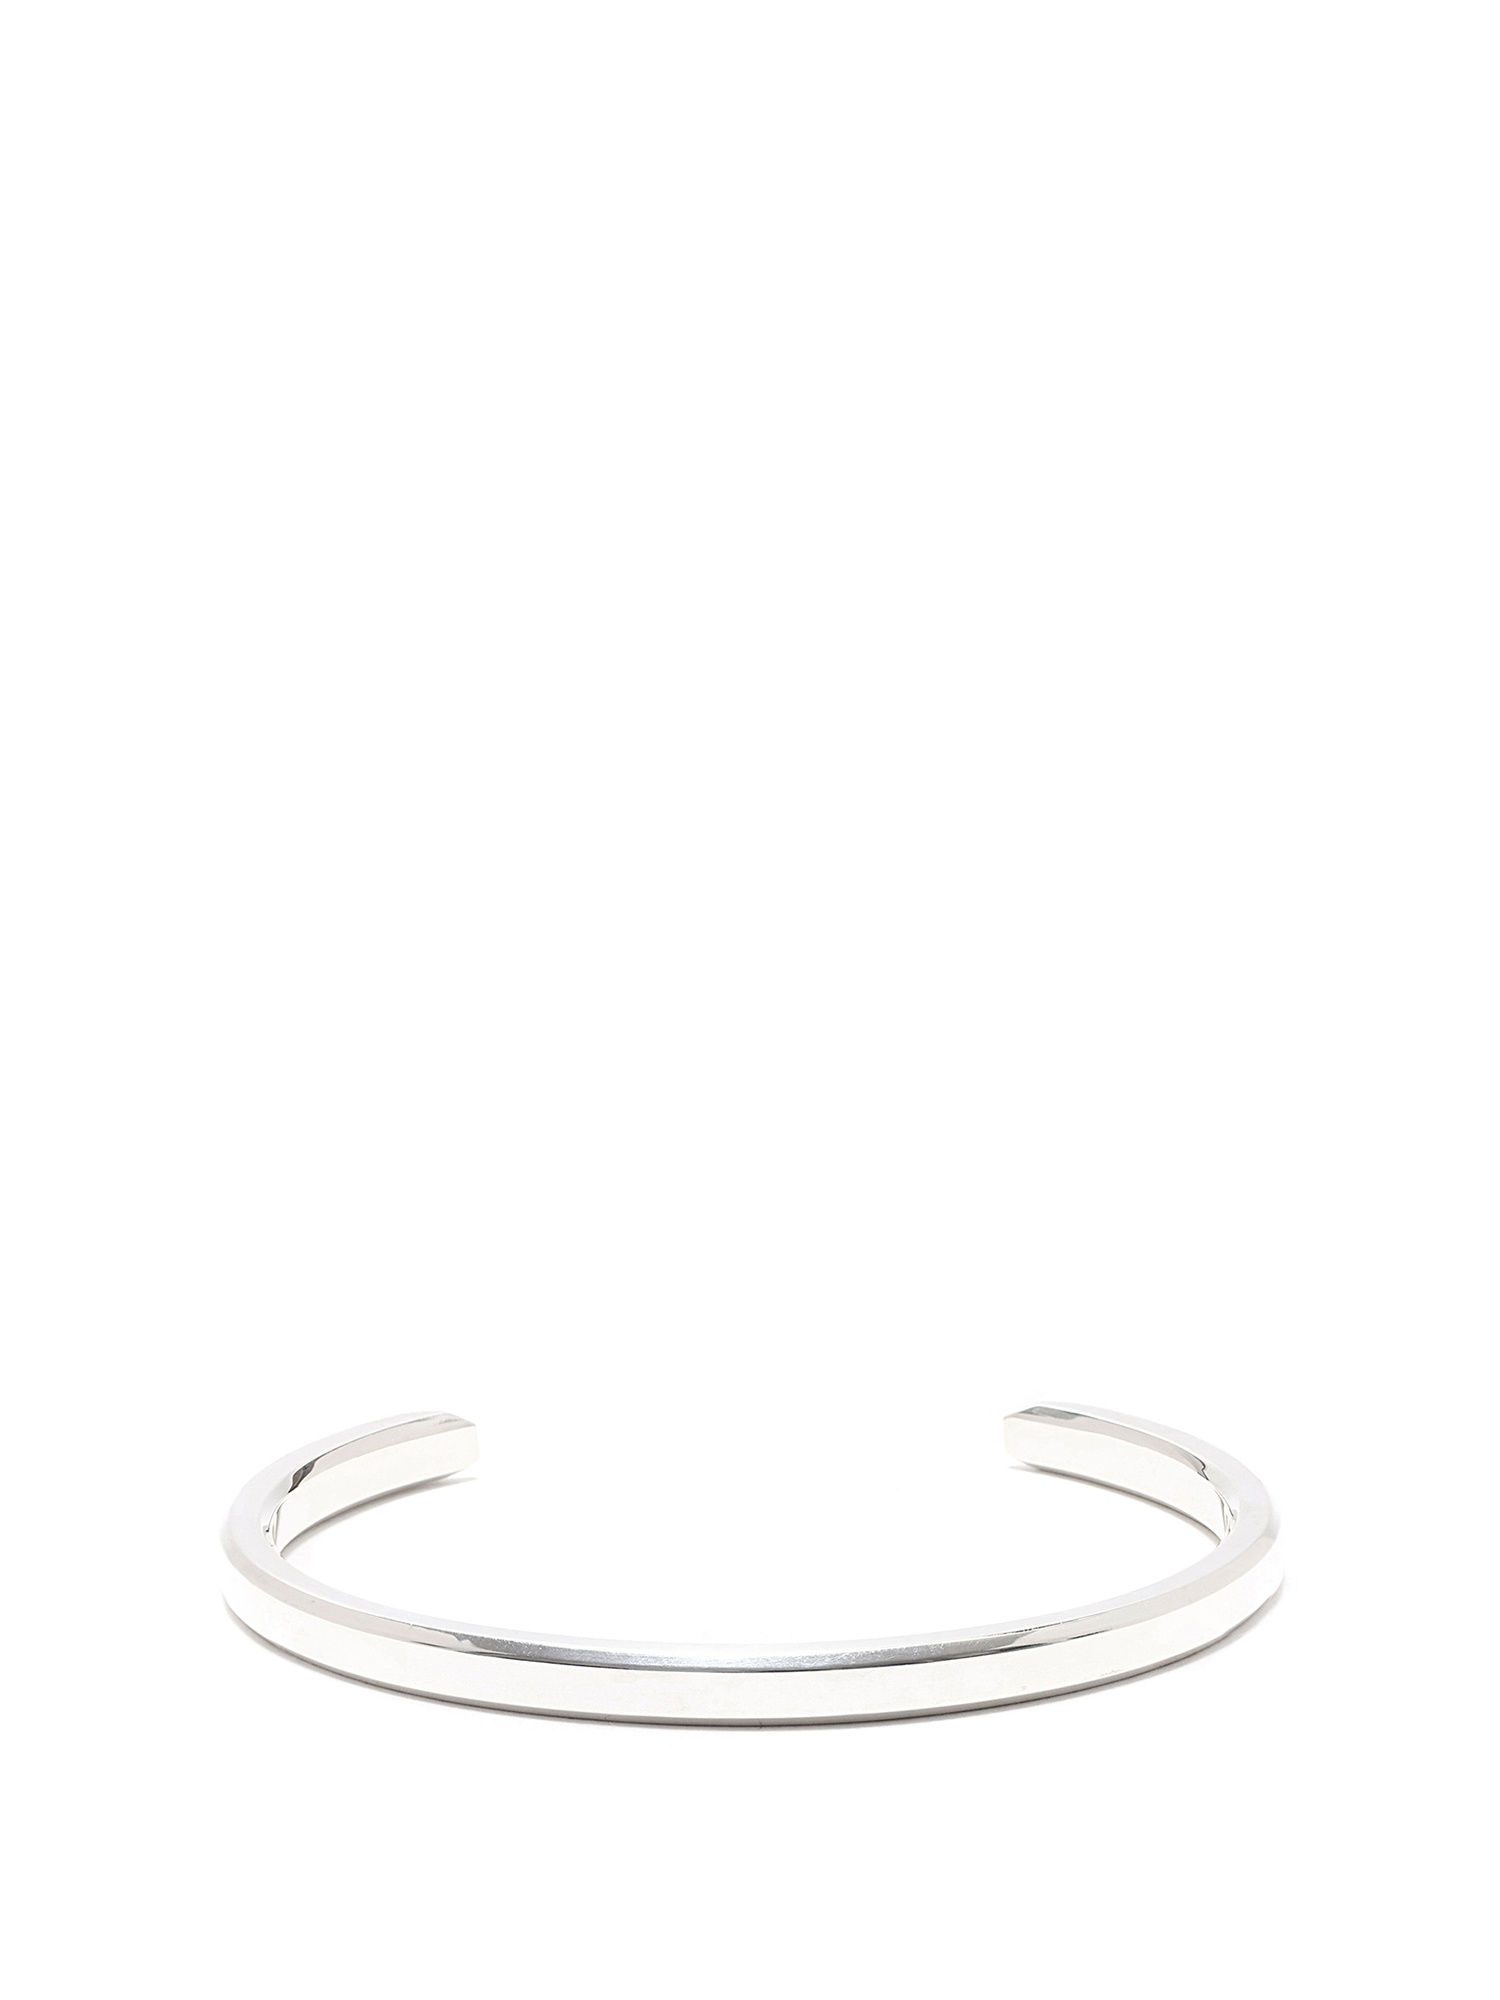 Tiffany & Co. Makers Narrow Cuff in Sterling Silver | RUSE